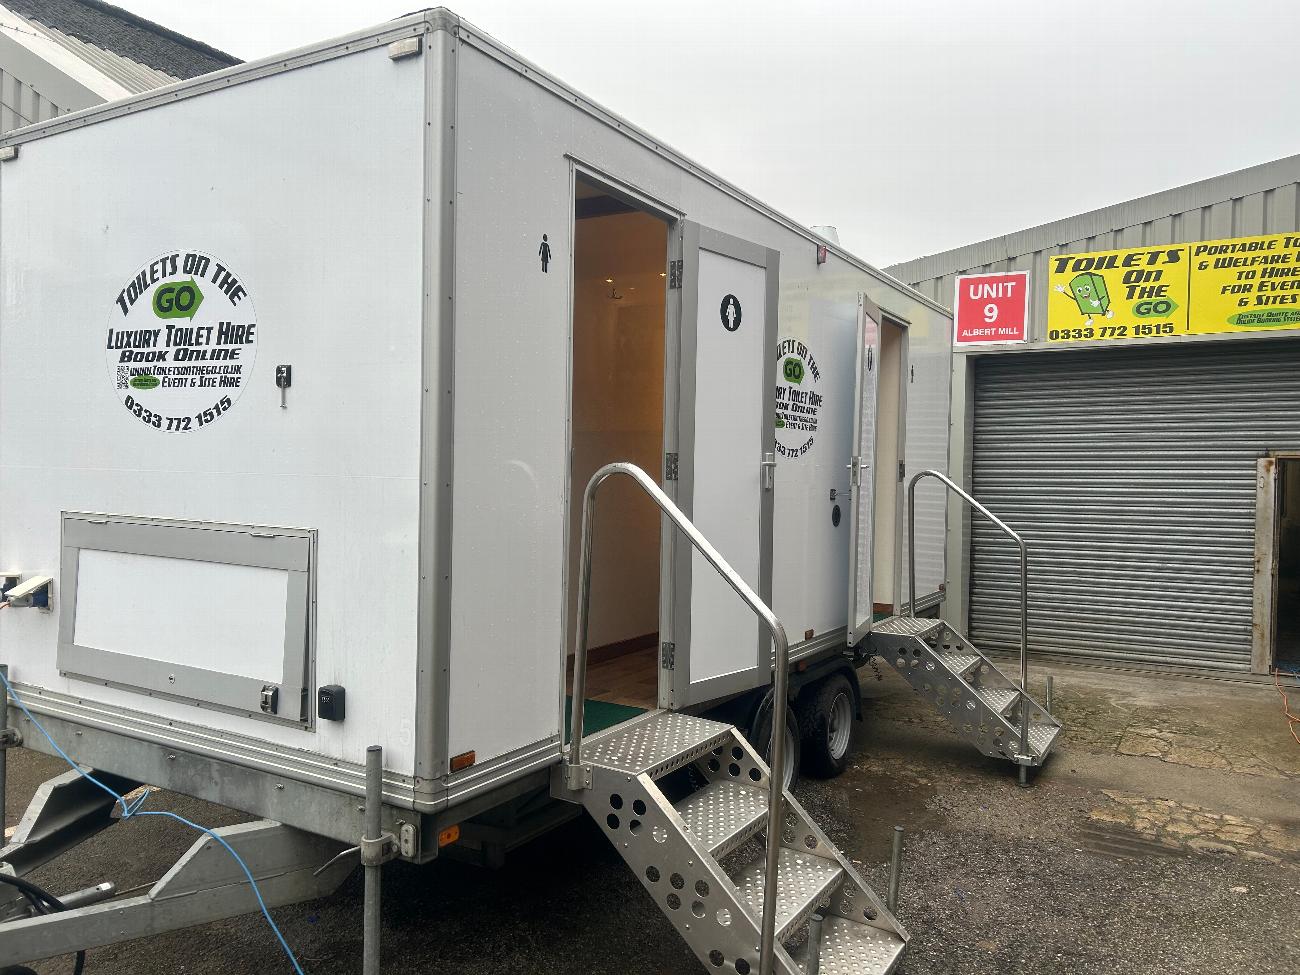 Portable Toilet Loo Hire Events and site rental Book Online gallery image 5